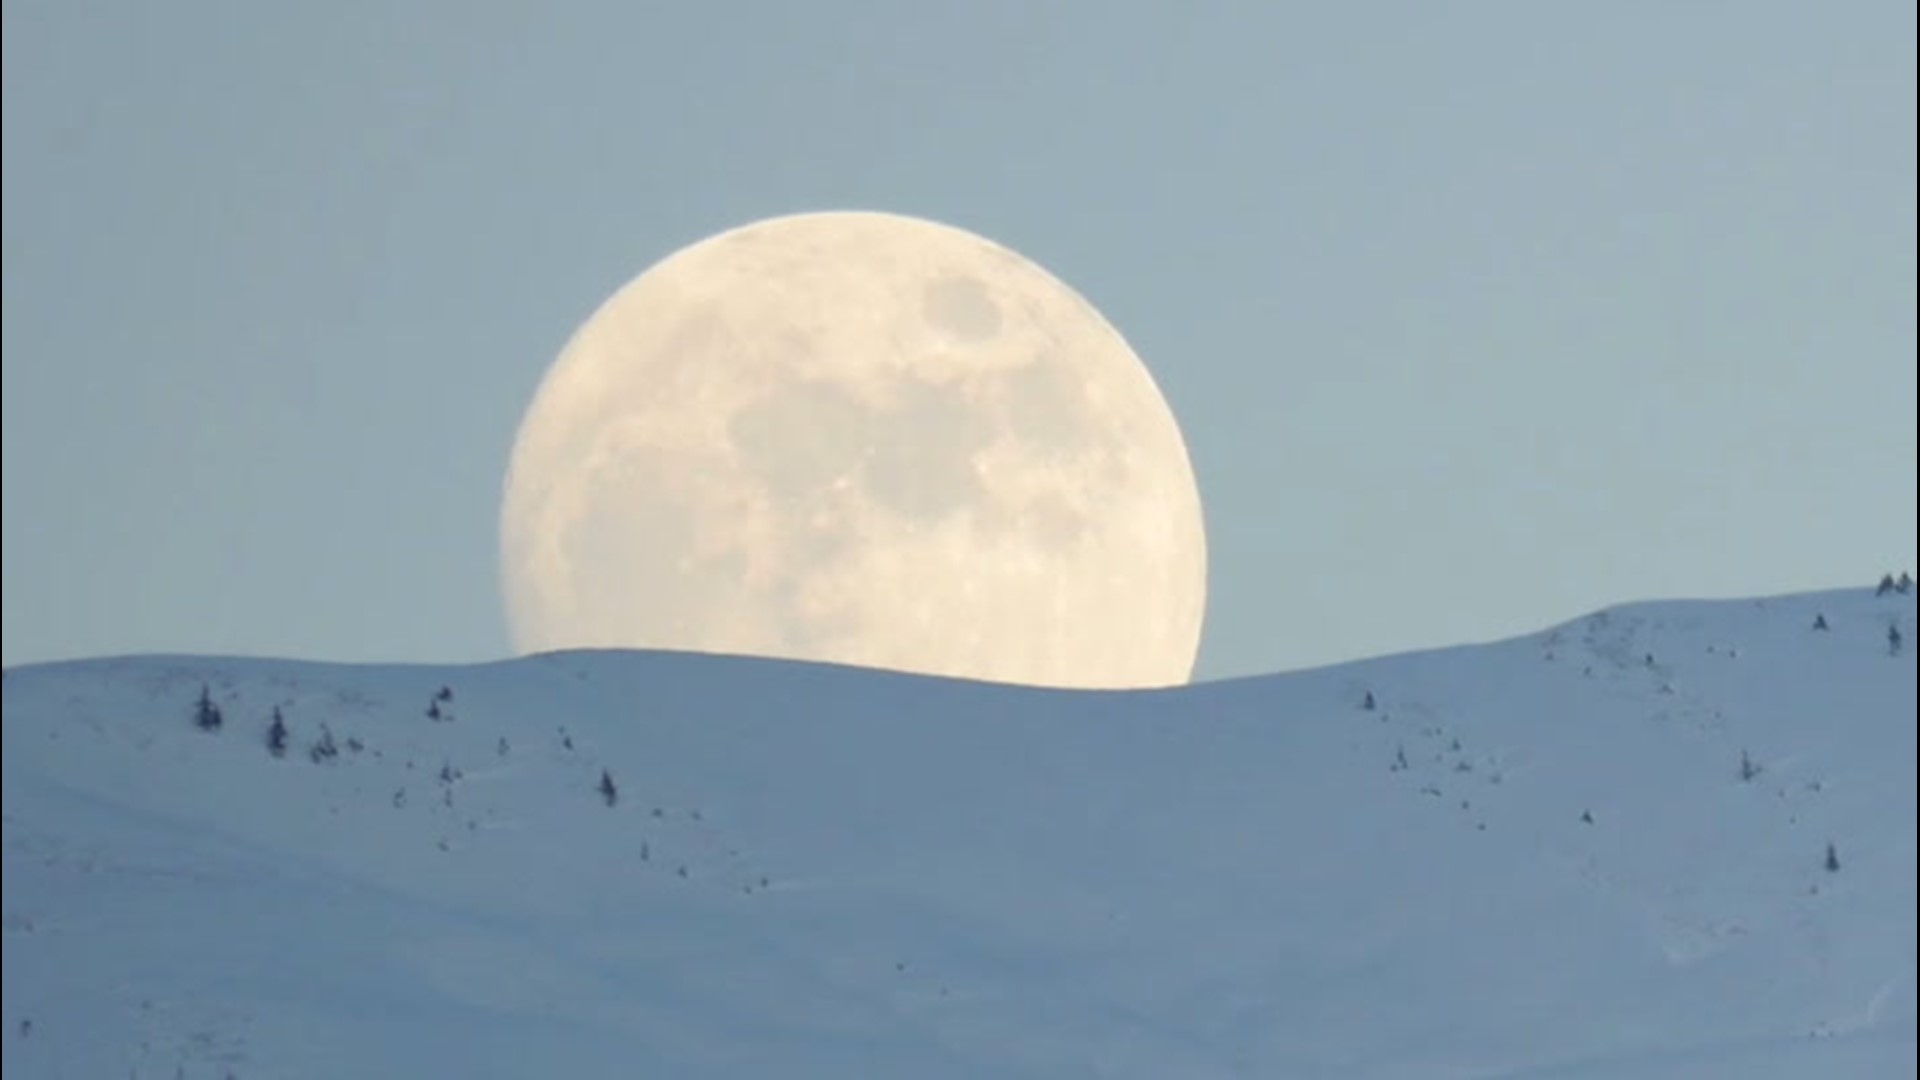 February's full moon is going to be a little bit more super this weekend on the night of Feb. 8-9. It's the first of four straight supermoons.